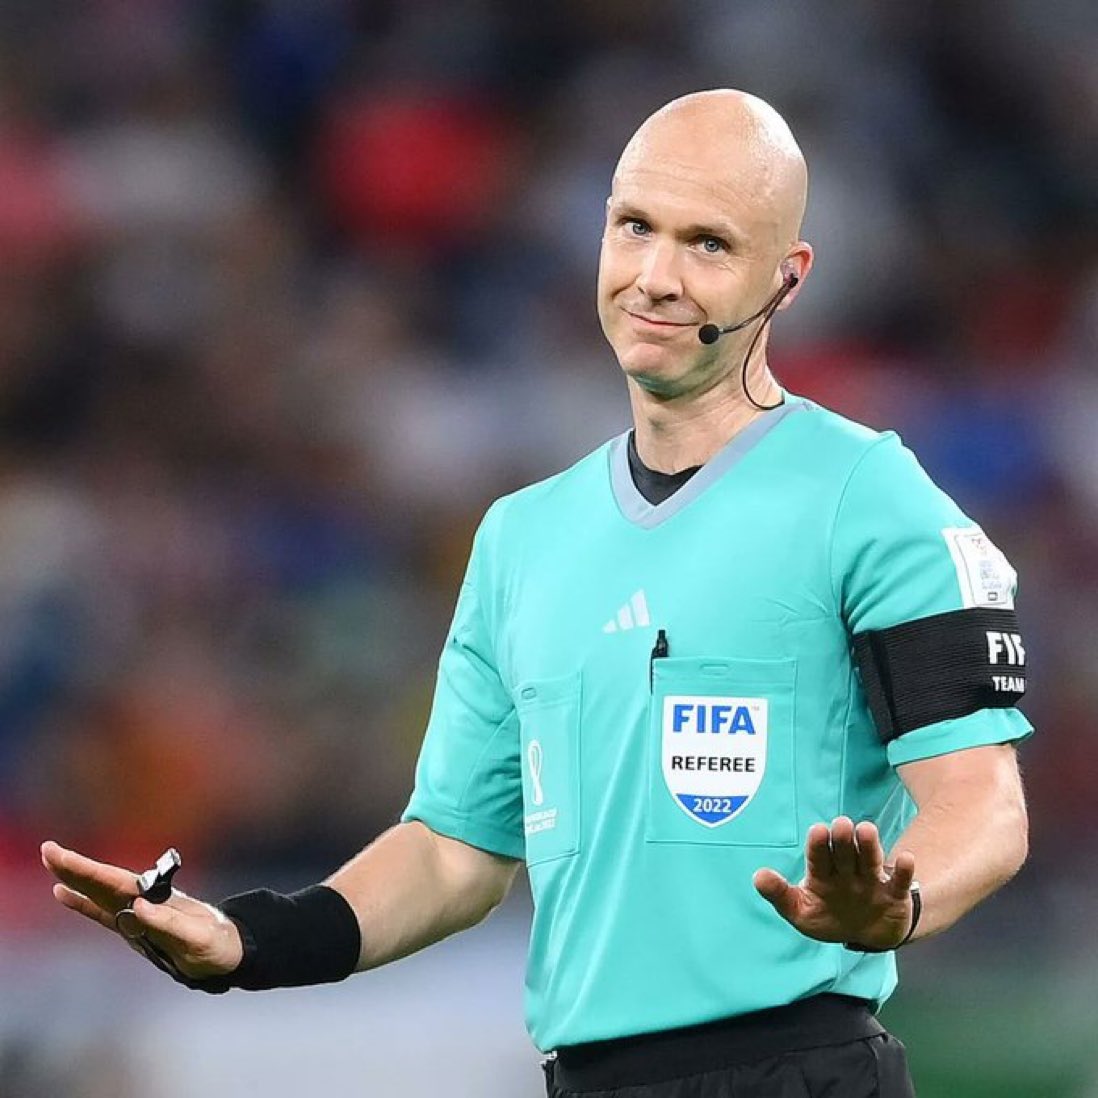 UEFA are reviewing decisions made by Anthony Taylor in the Europa League Final.

According to reports in Italy, UEFA agree with Roma & Mourinho about his performance. 

Taylor is now at risk of missing big games on the European stage.